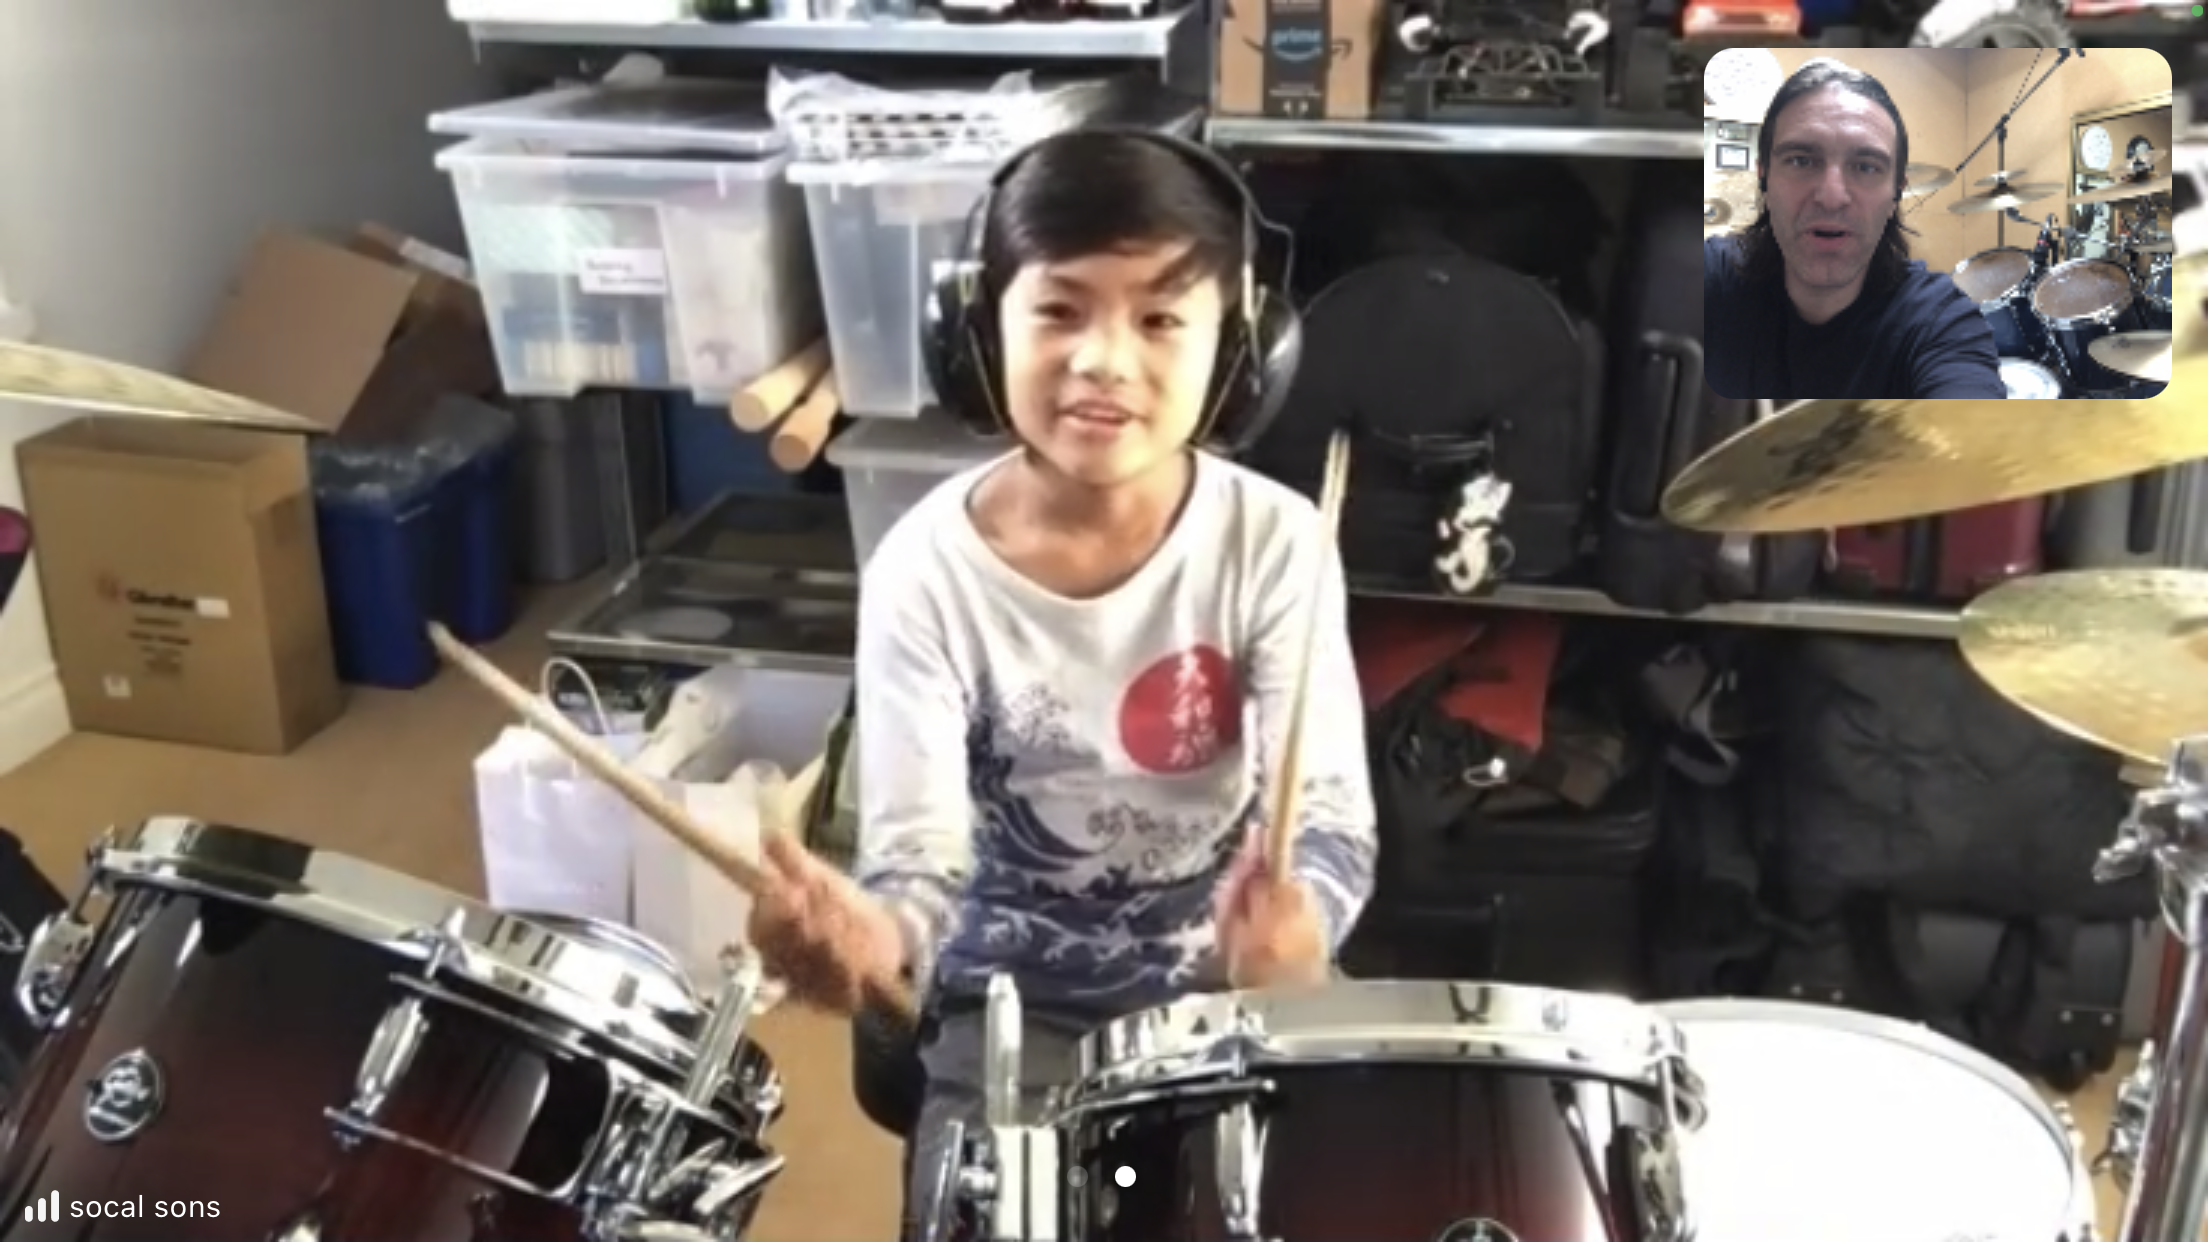 drum lessons for kids